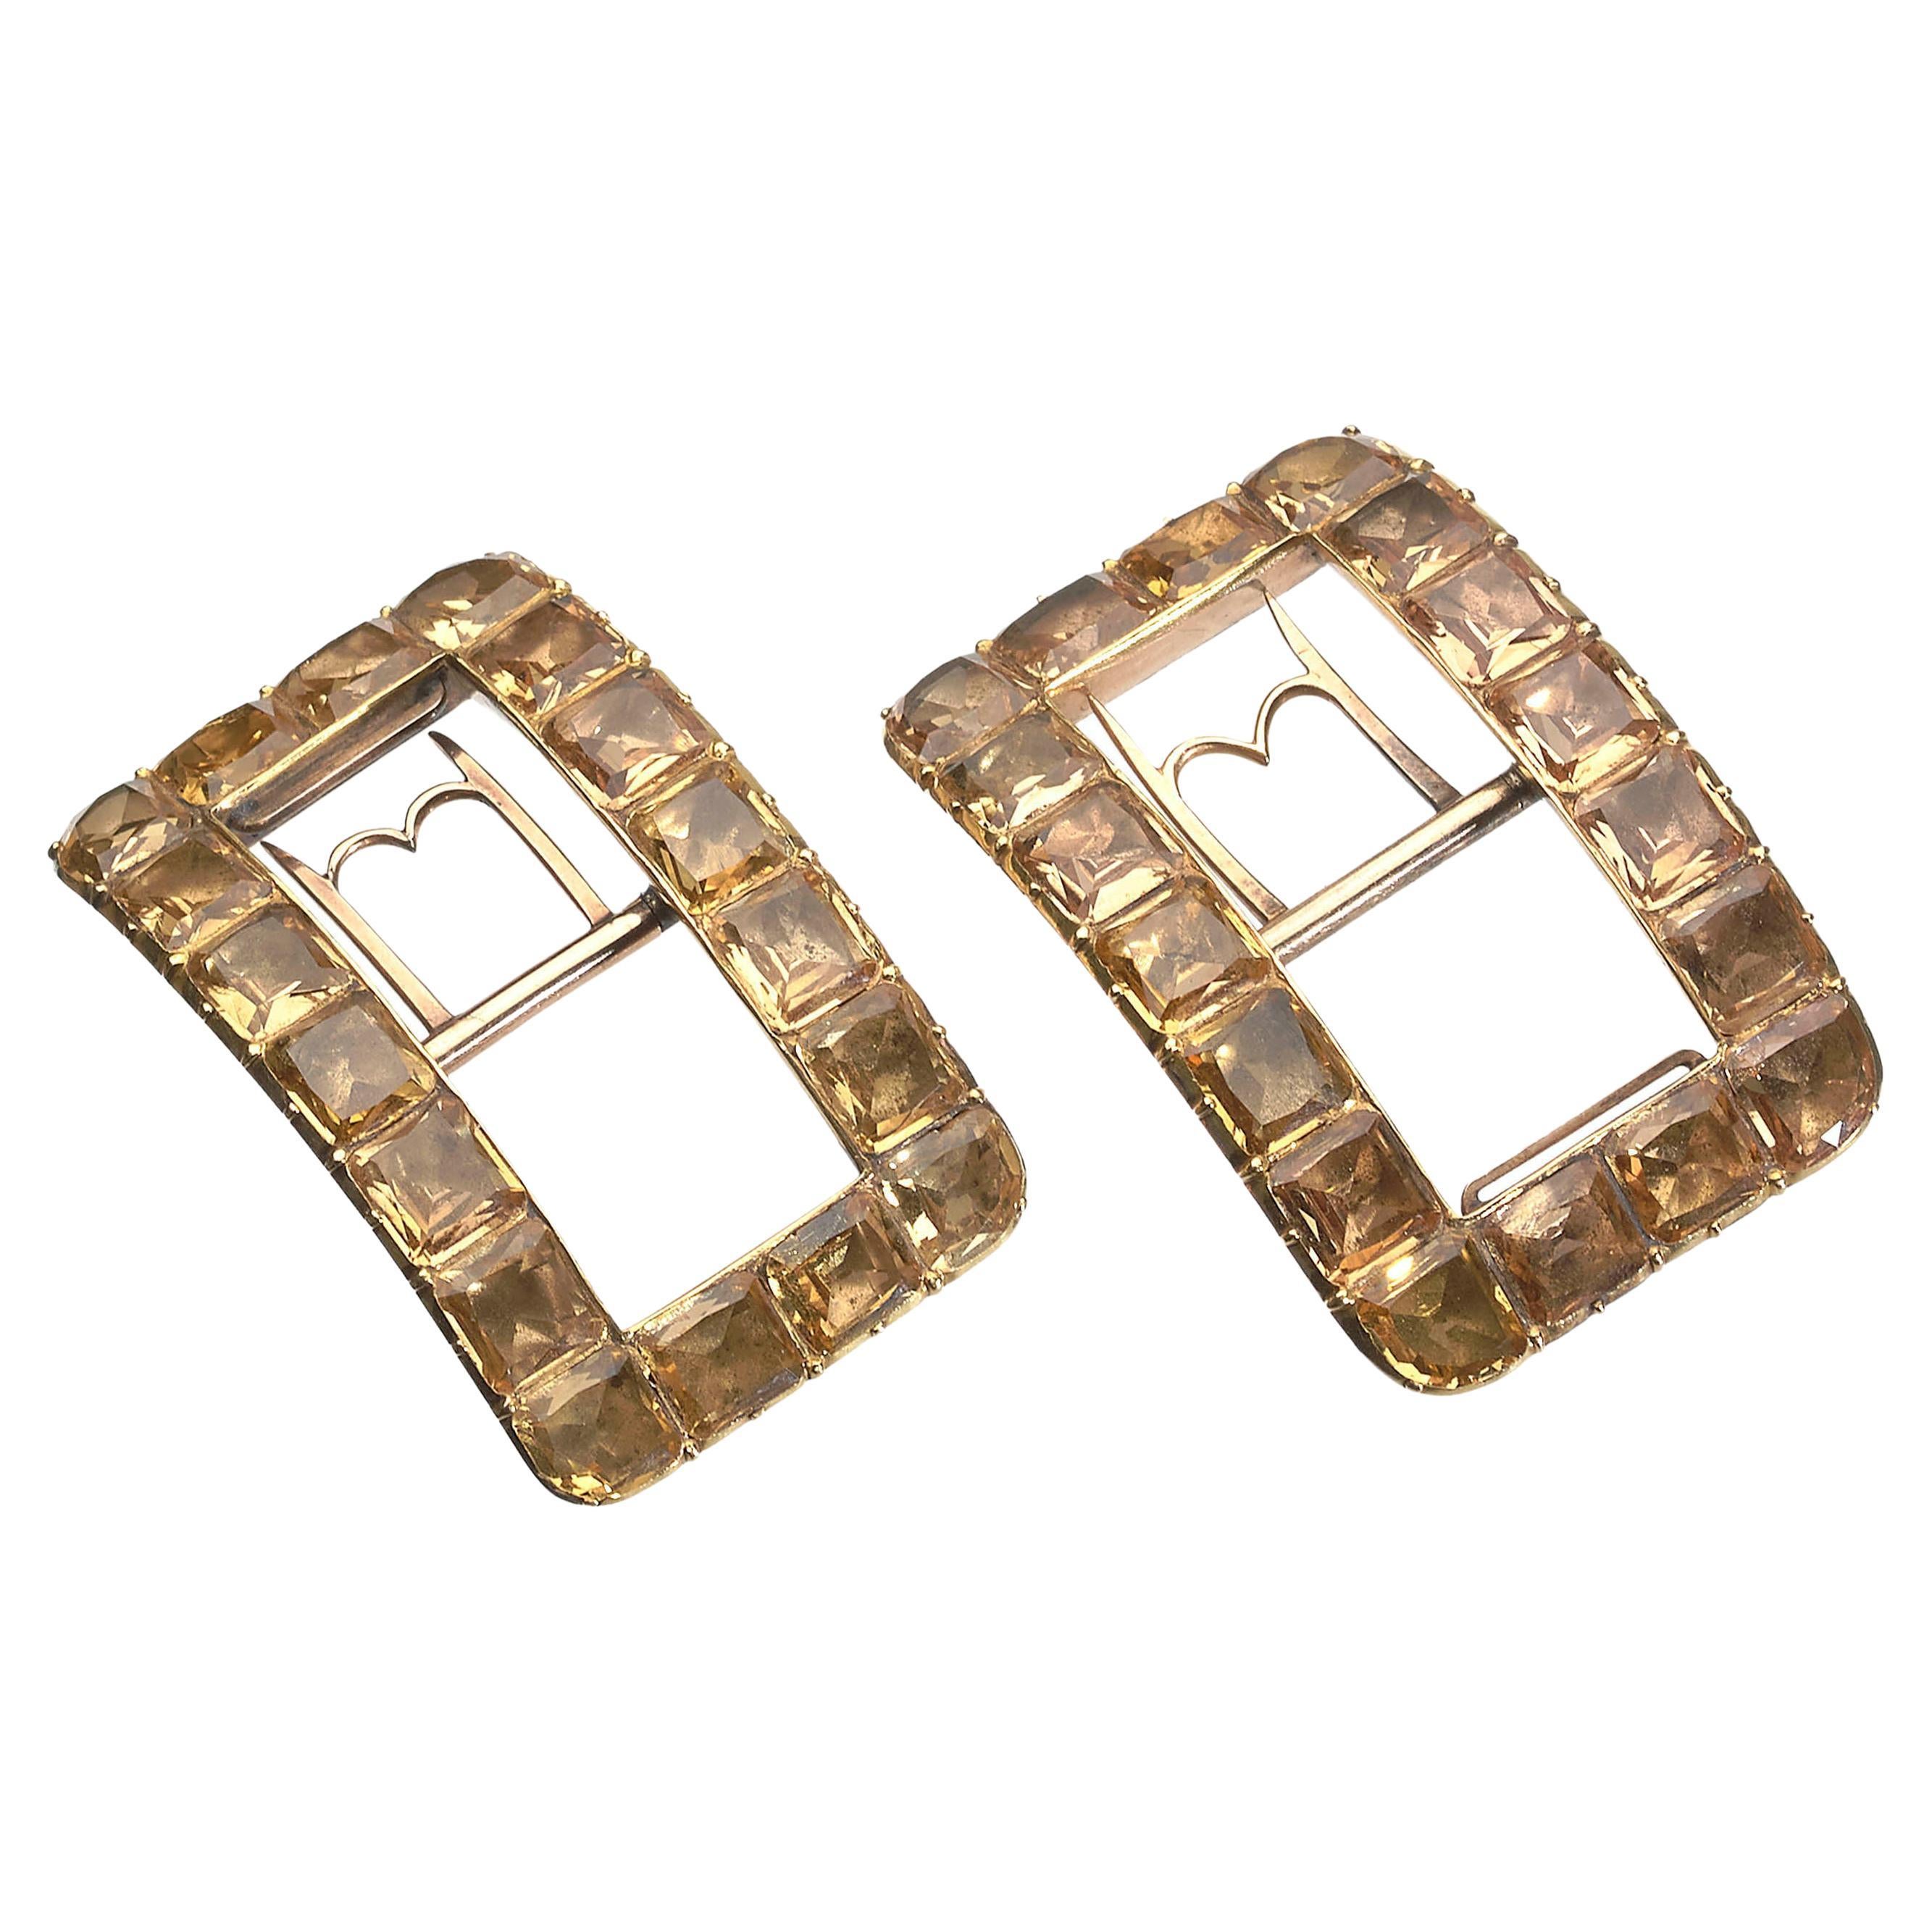 Antique George III Topaz and Gold Shoe Buckles, circa 1790 For Sale